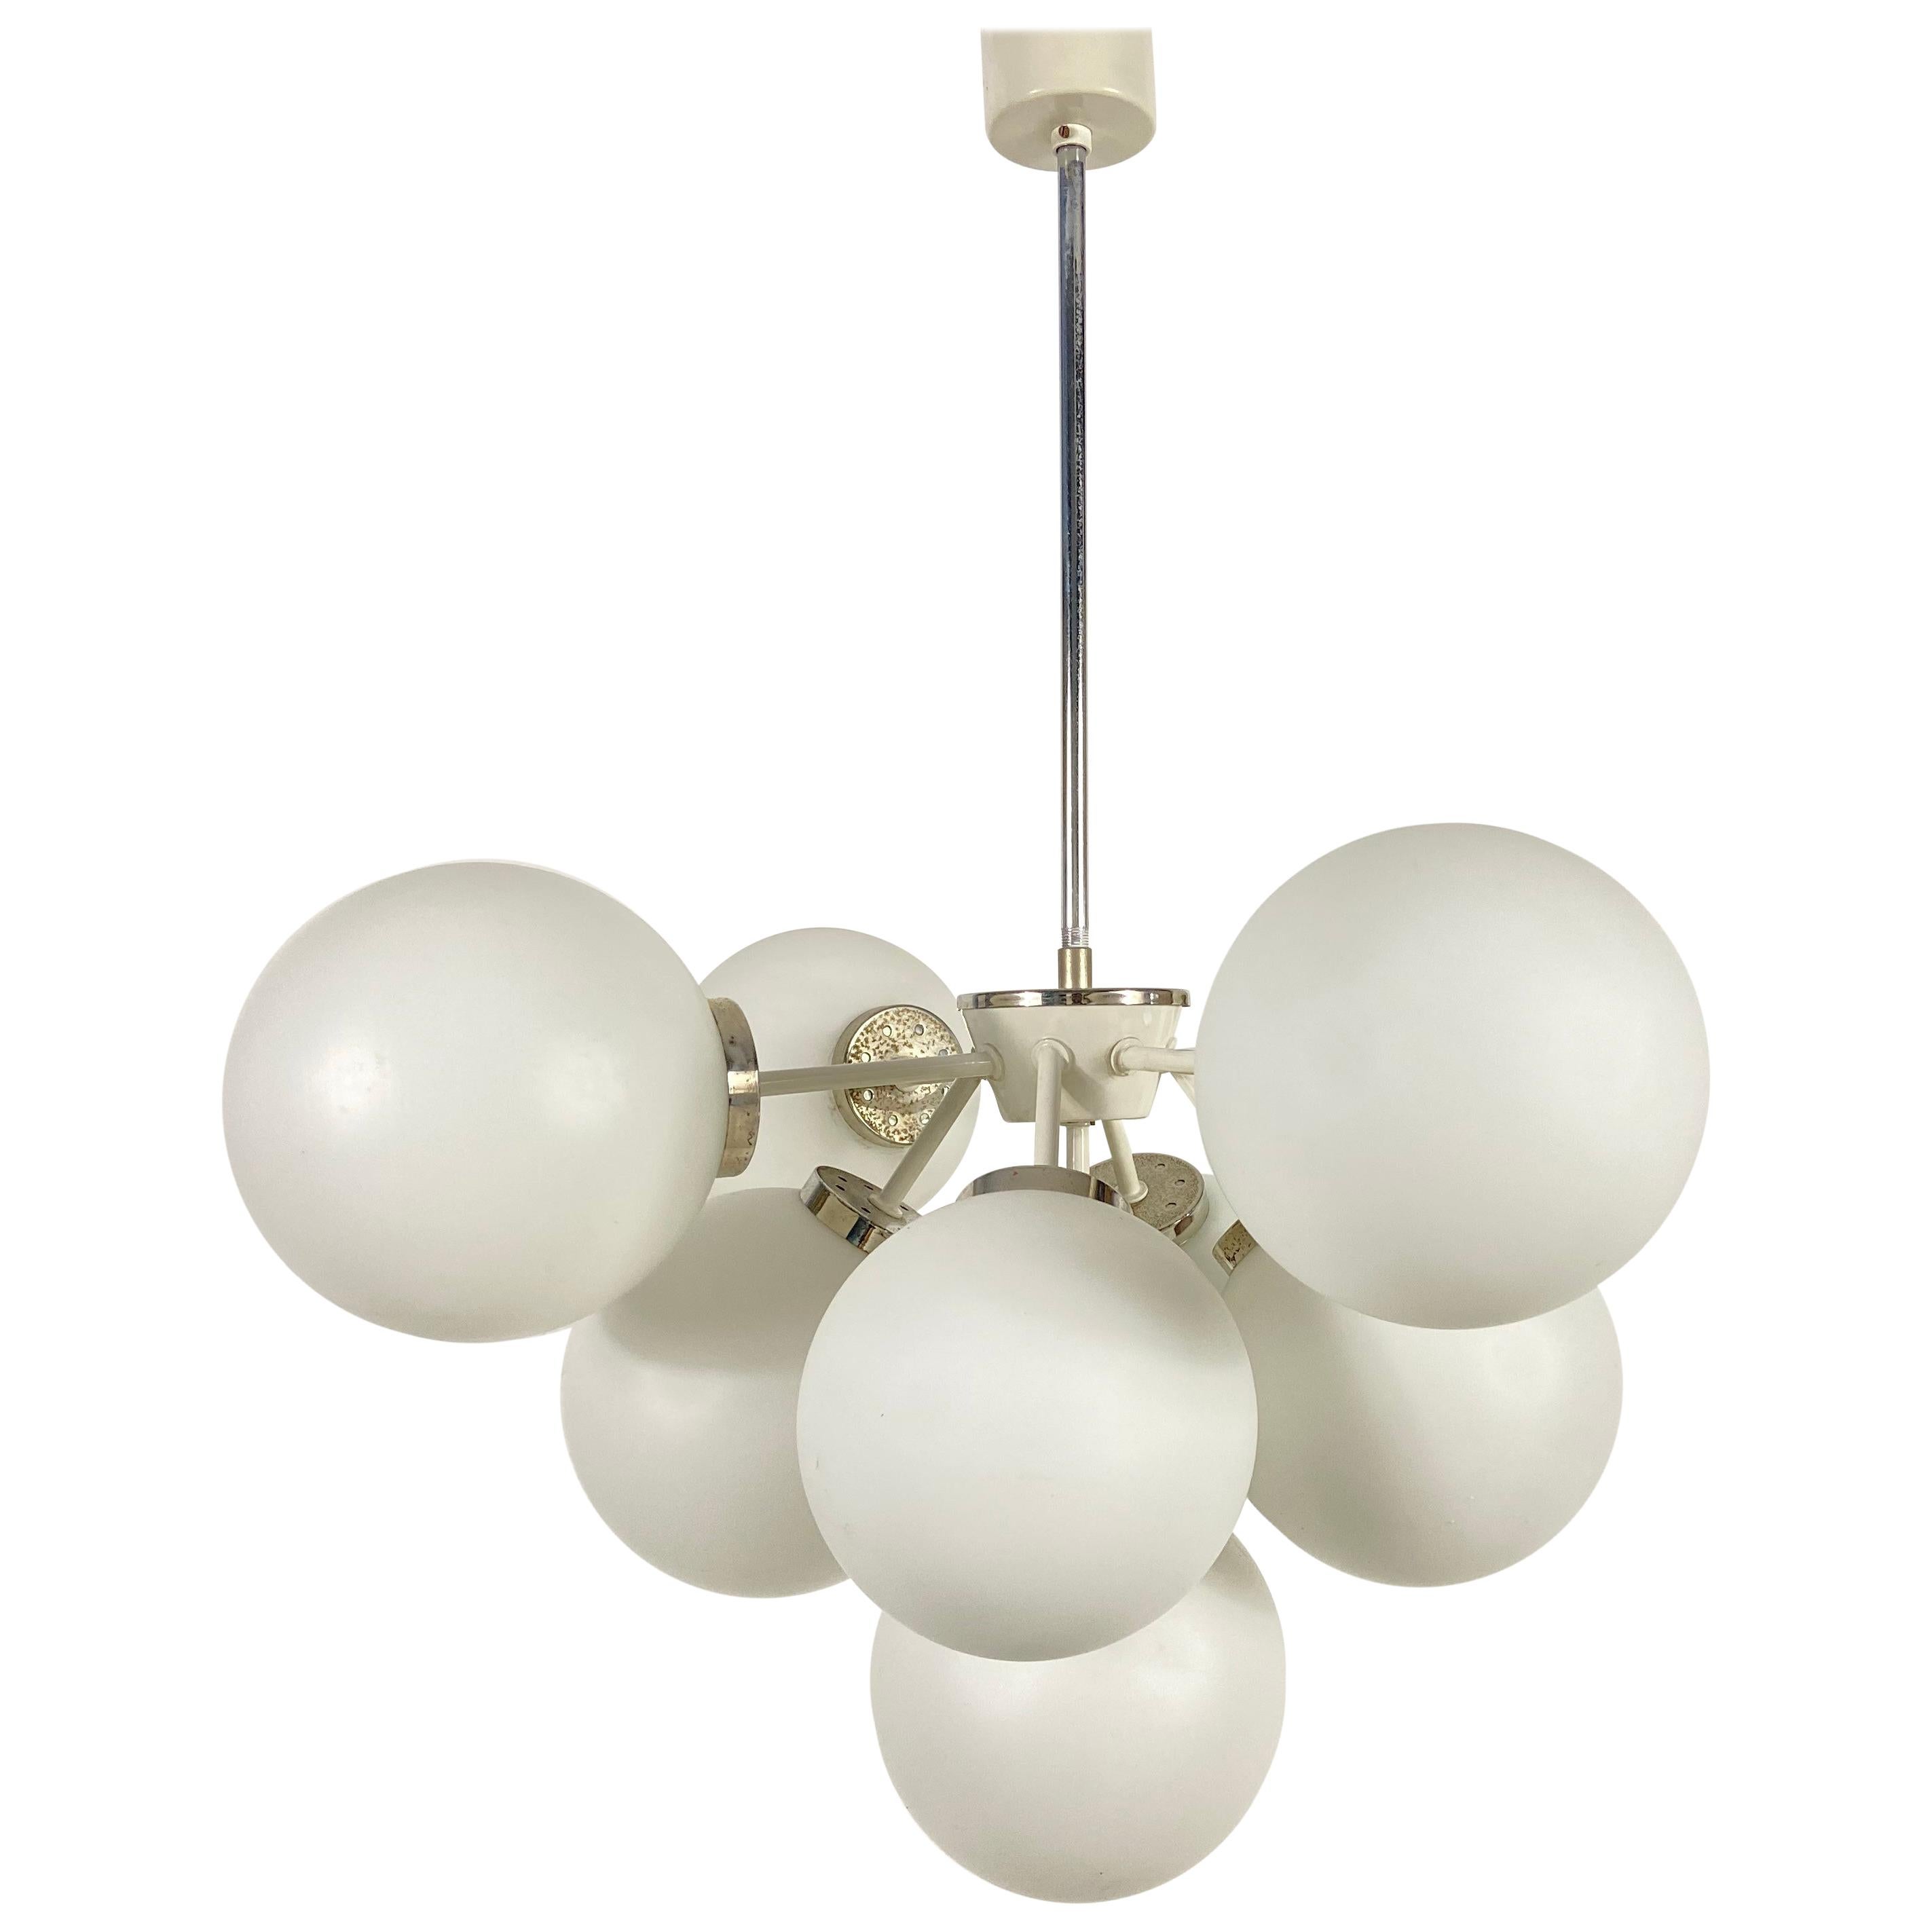 Large Kaiser Midcentury White 9-Arm Space Age Chandelier, 1960s, Germany For Sale